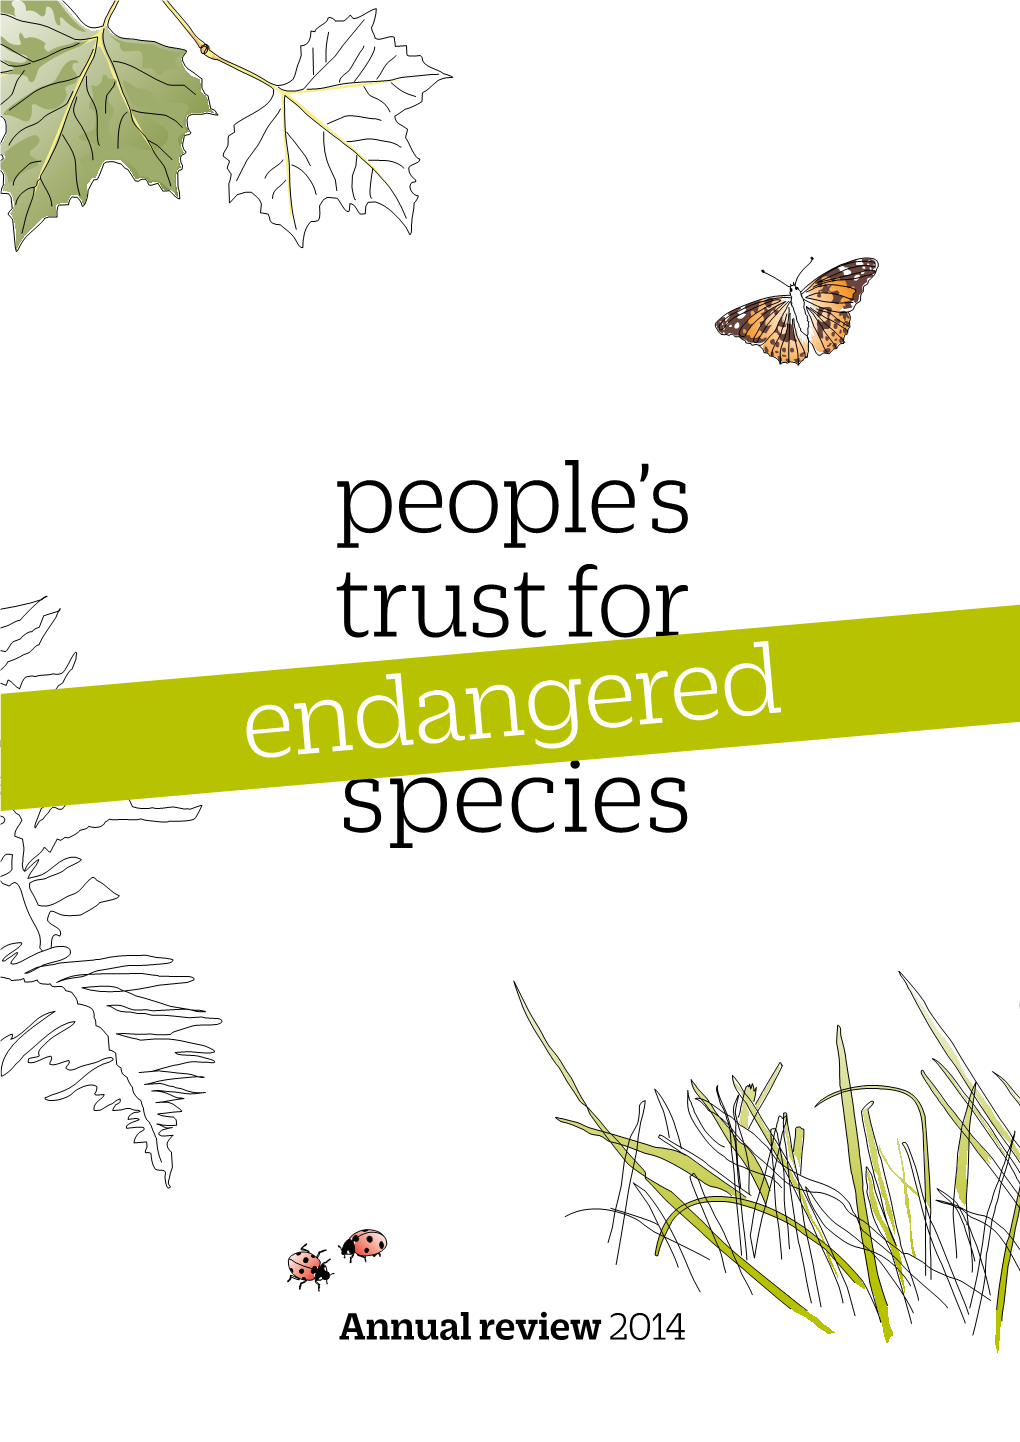 People's Trust for Endangered Species